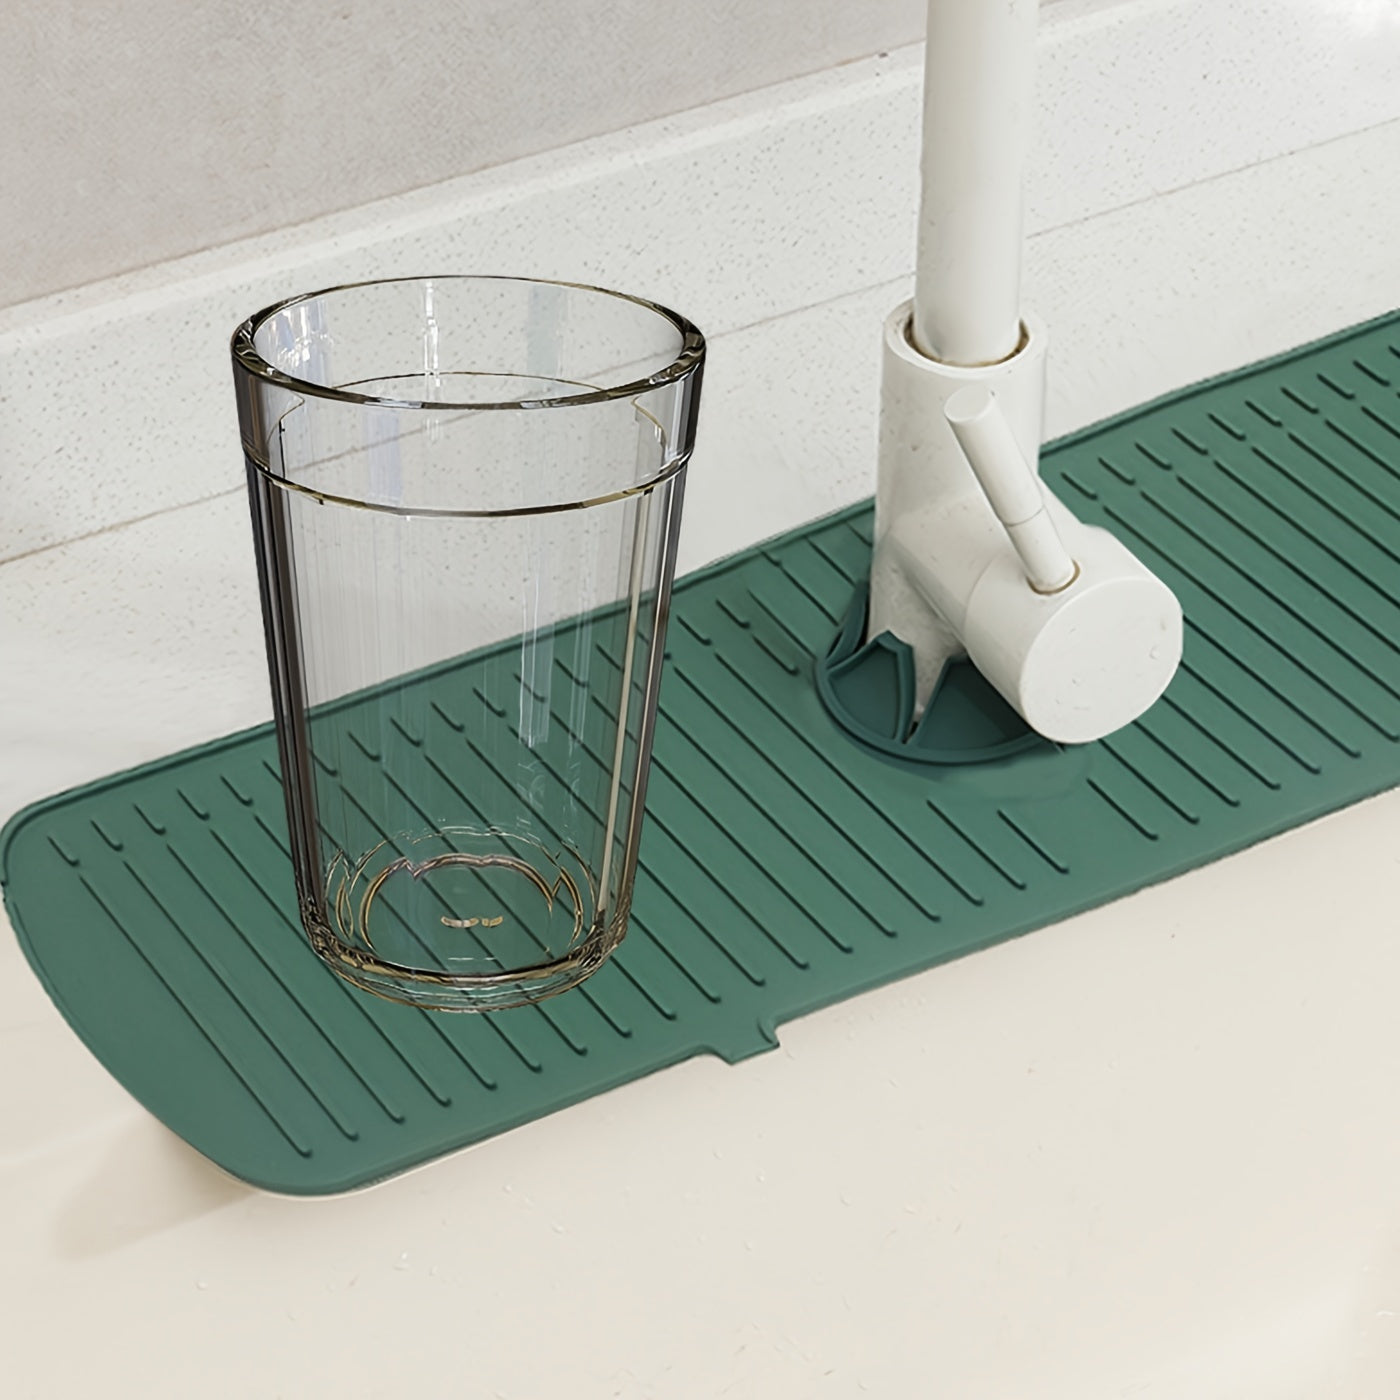 Upgrade Your Kitchen And Bathroom With This 1pc Sink Faucet Mat Splash Guard!